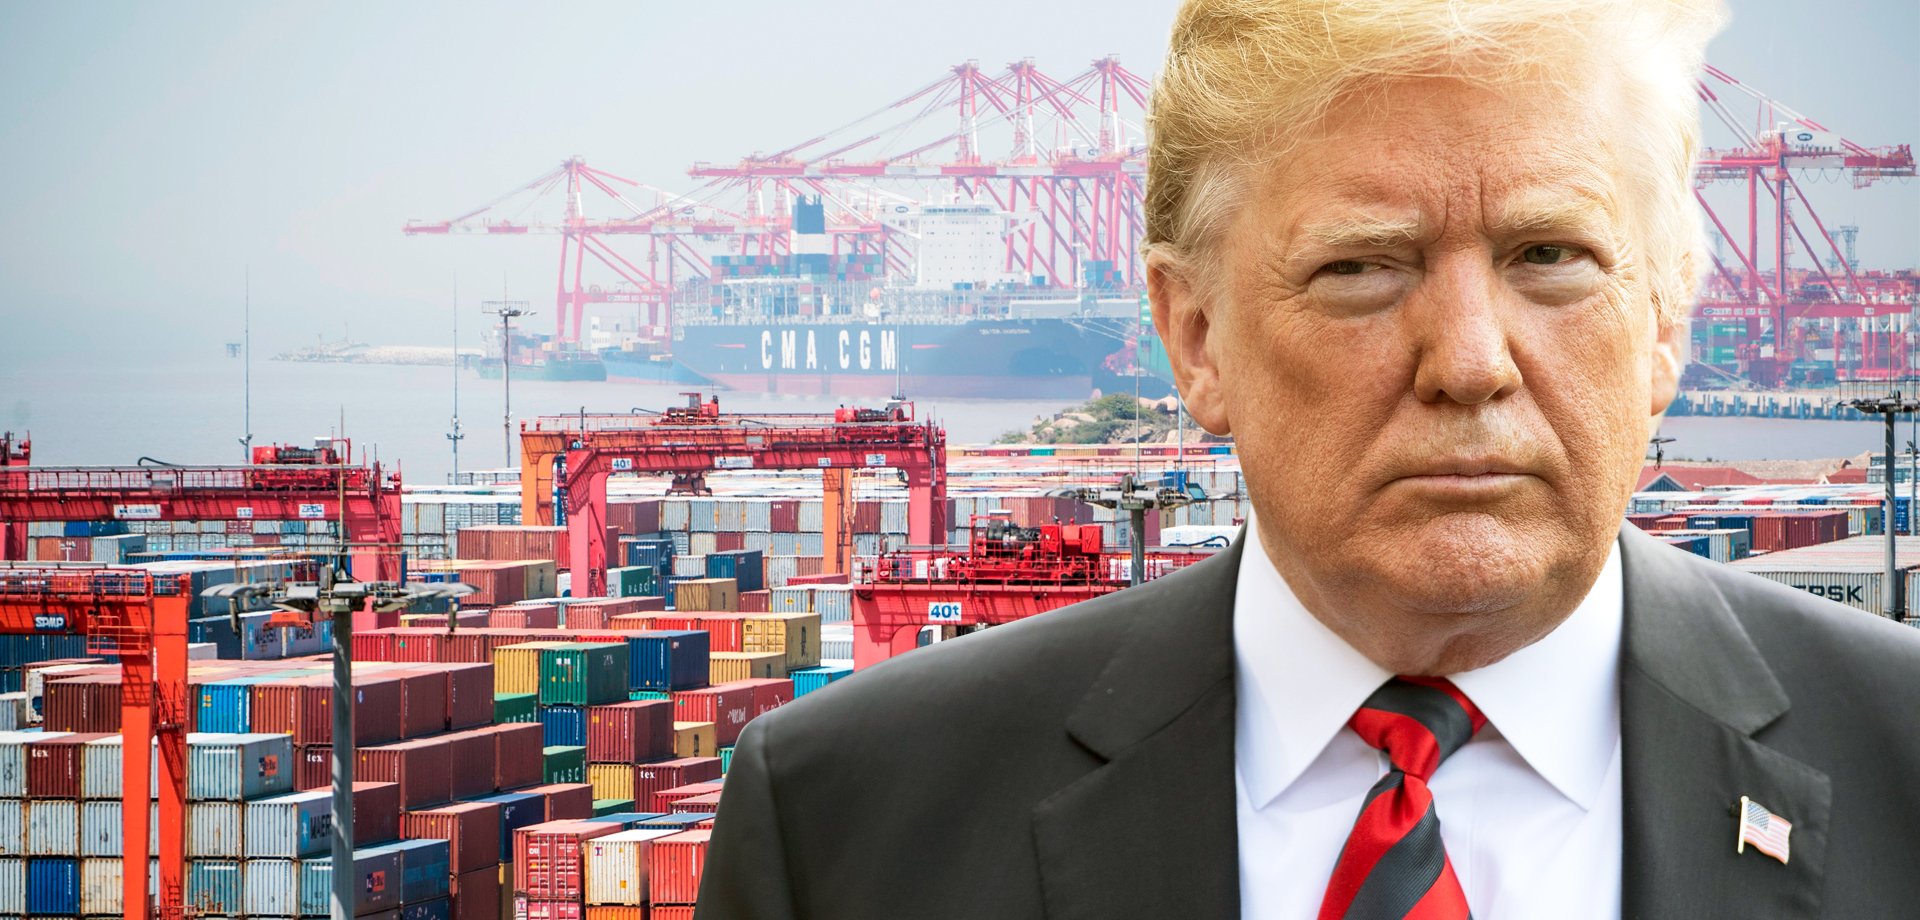 The Trump administration’s protectionist measures on trade are piling up — and so are the retaliatory moves from a spate of other countries. What began with small-scale U.S. tariffs on washing machines and solar panels has now broadened to include steel and aluminum from all over the world, plus hundreds of products from China. Those tariffs have prompted a tit for tat response from affected countries, which target key U.S. exports such as bourbon, motorcycles, and orange juice. And there could be more to come, with the Trump administration studying further tariffs on imported cars and threatening much more action against China.